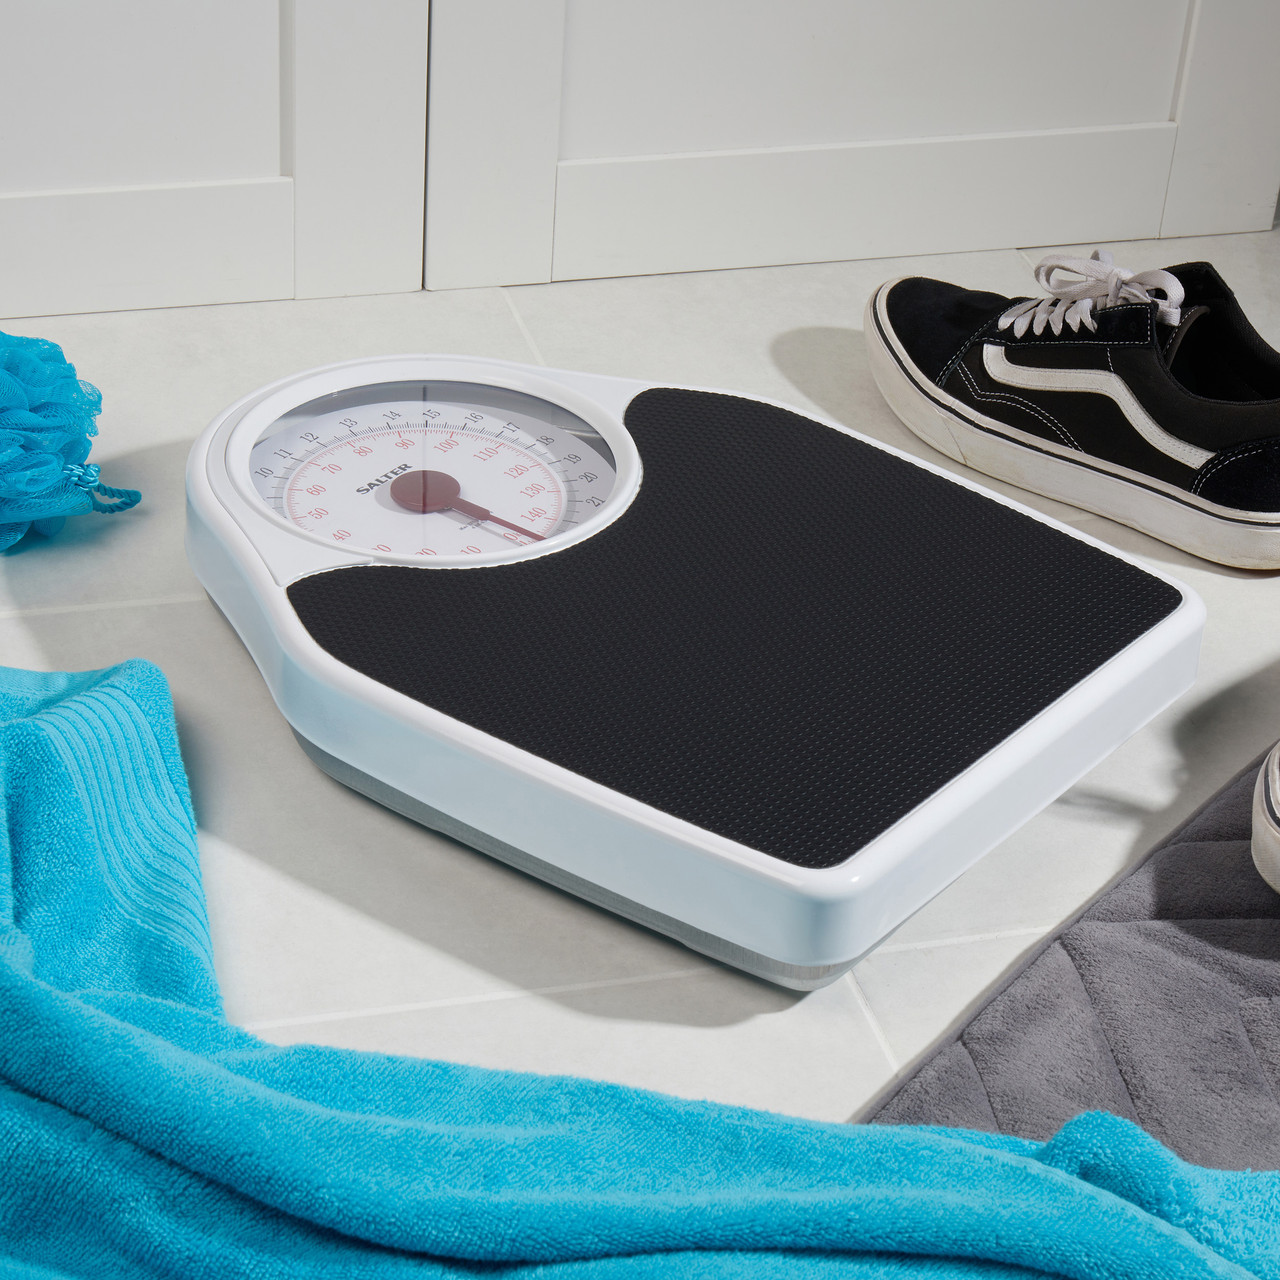 Salter 195 WHKR Doctor Style Mechanical Bathroom Scale, Fitness